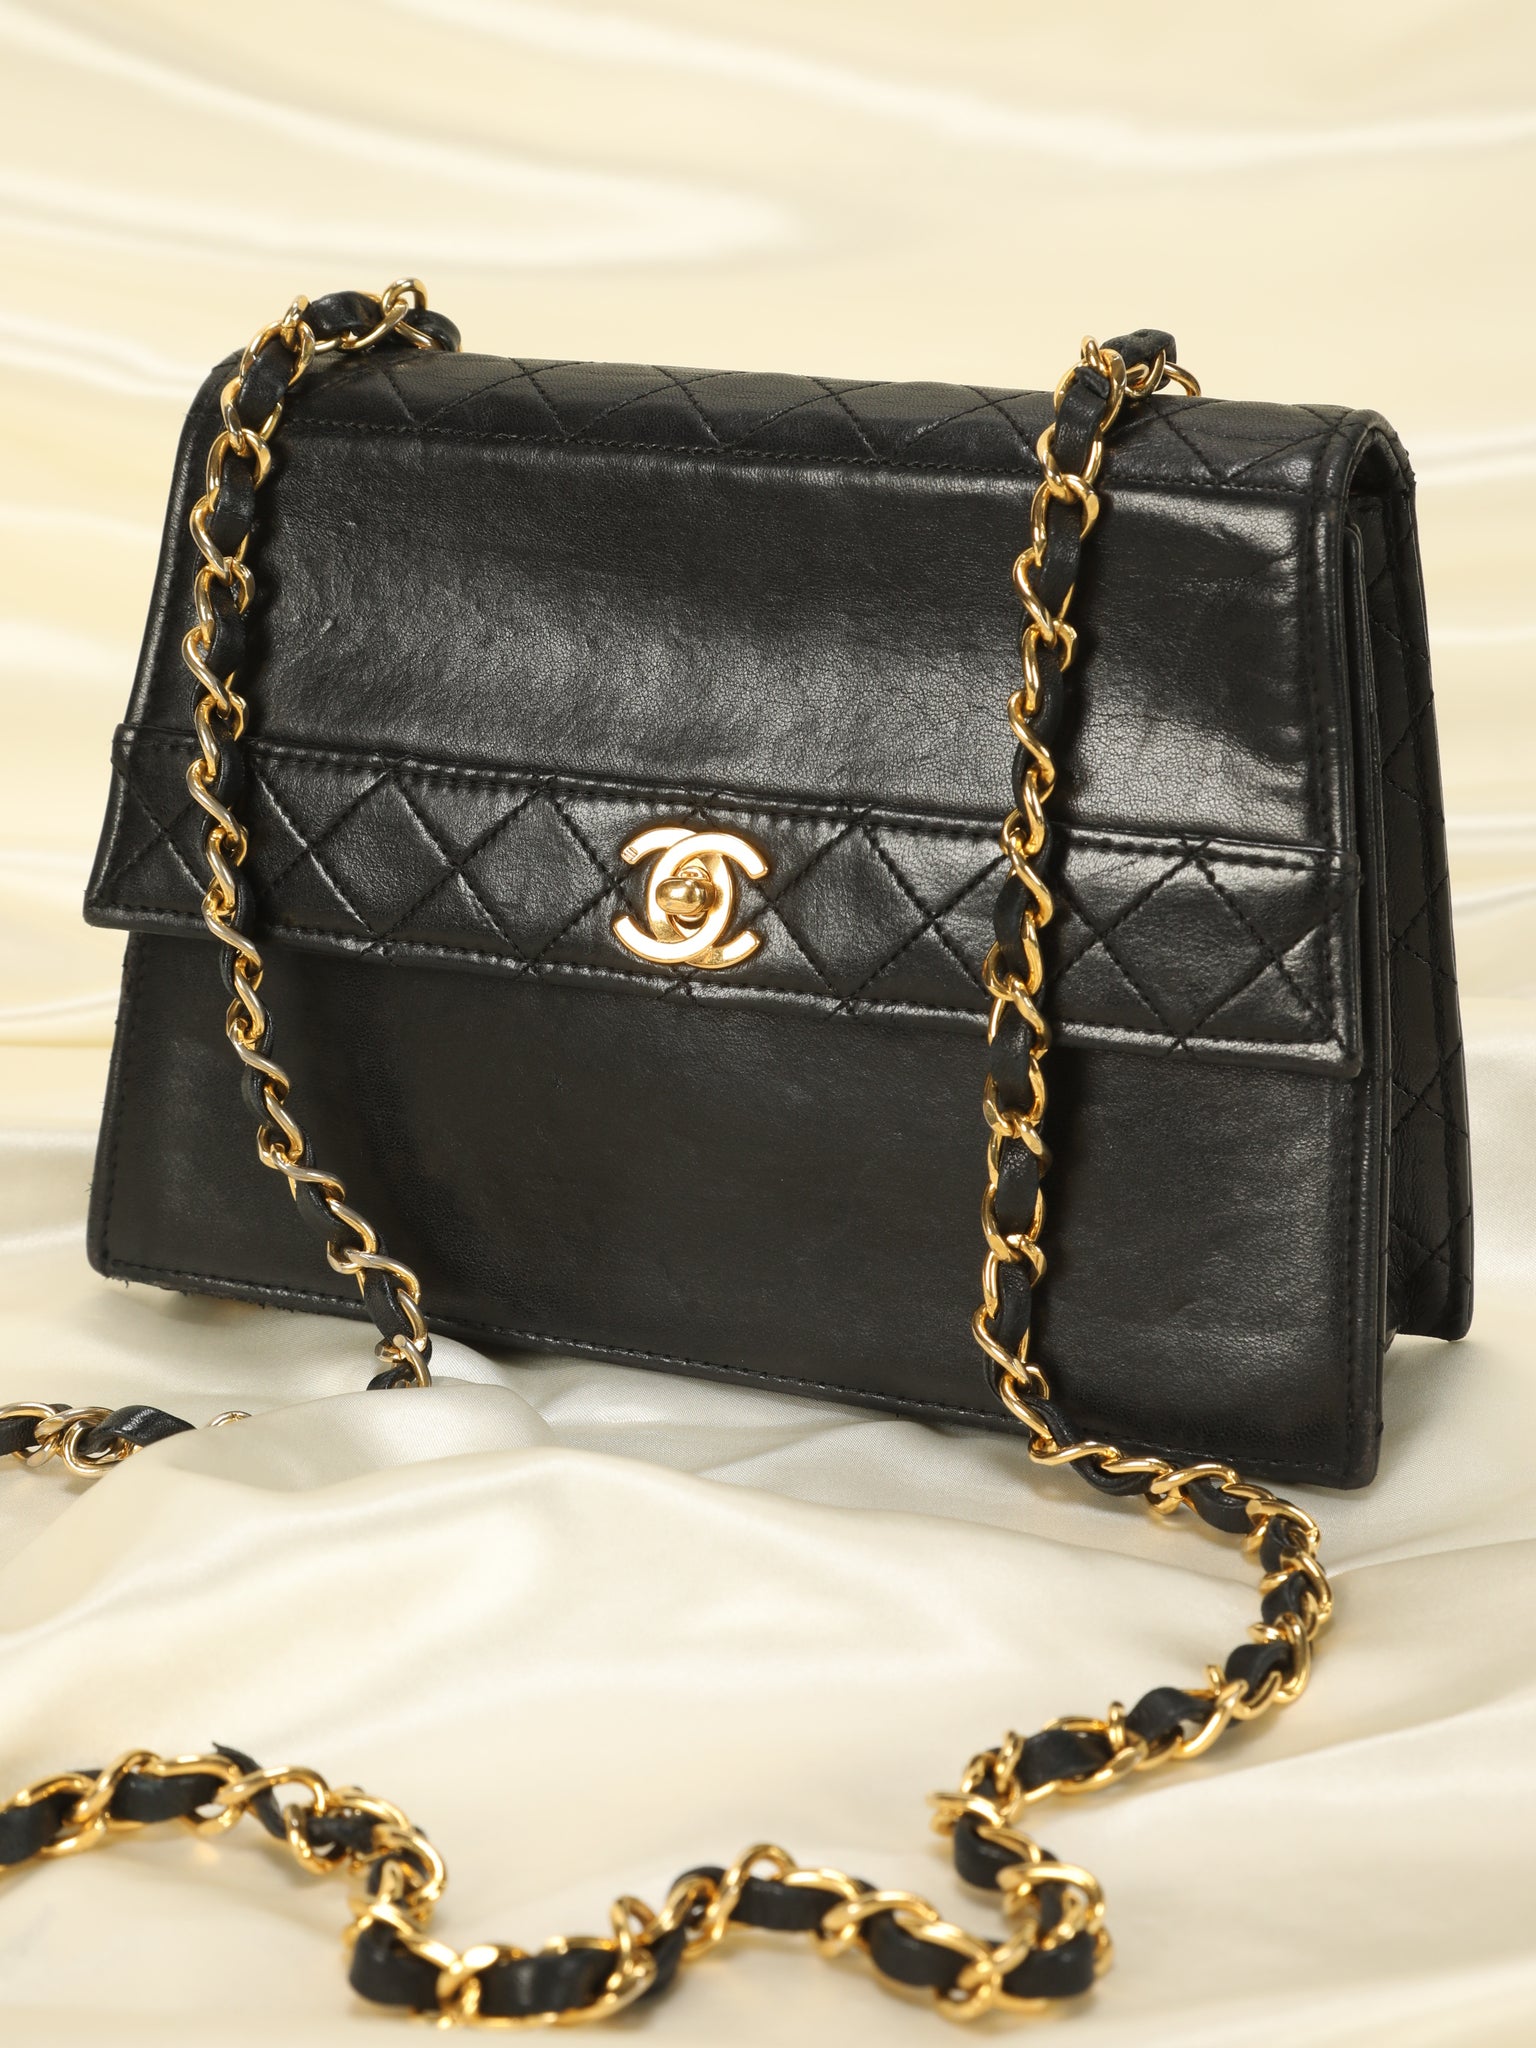 Extremely Rare Chanel Trapezoid Lambskin Bag with Wallet – SFN